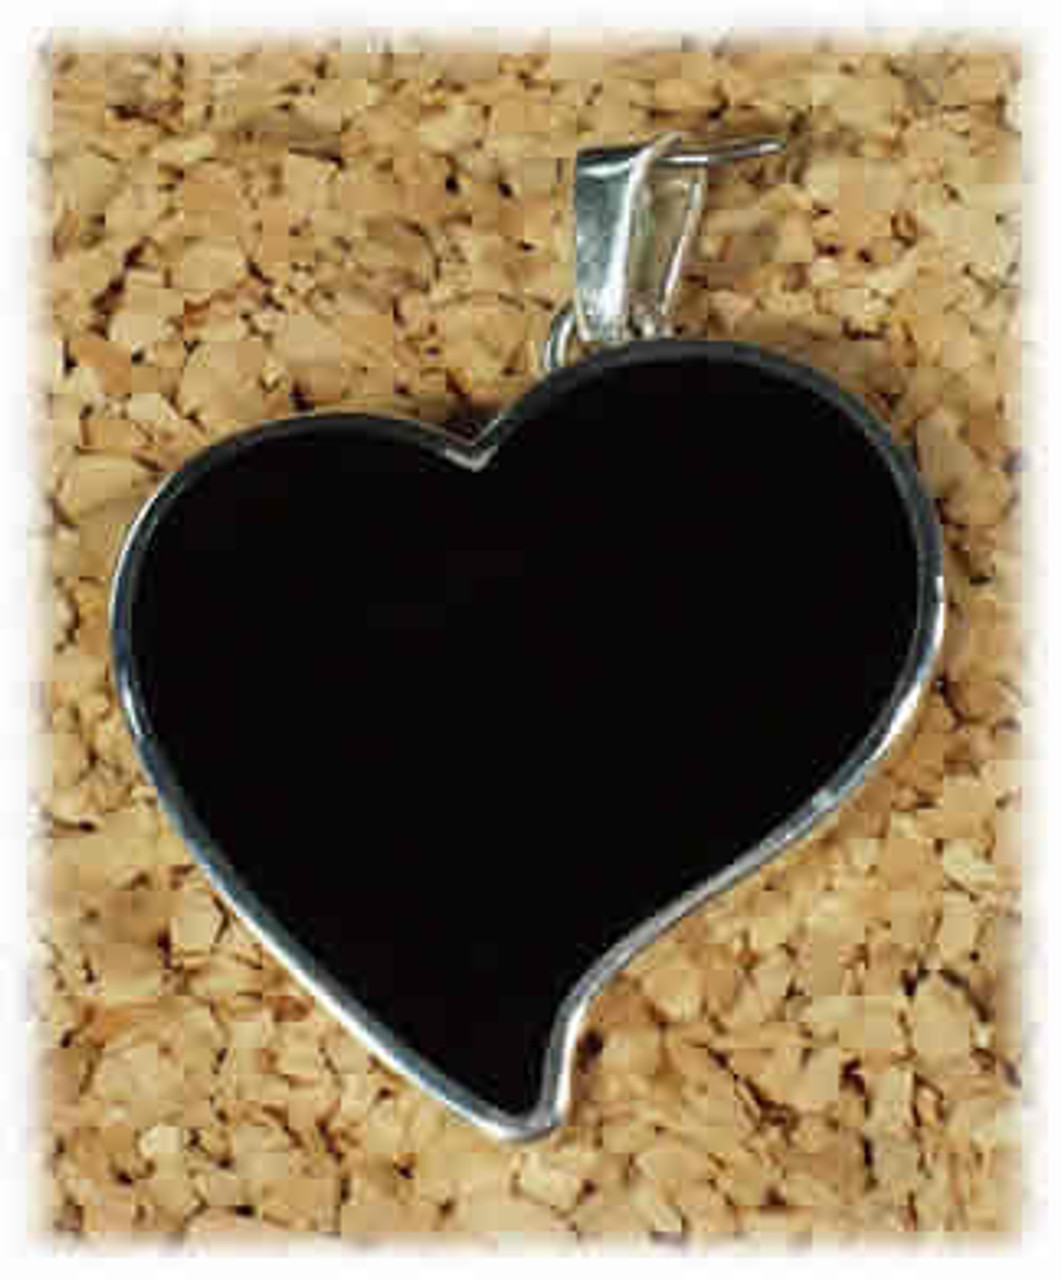 HS-830BO: Black Onyx Heart Pendant Mounted in Sterling Silver, Engravable Area, 1-3/16 inch x 3/4 inch.